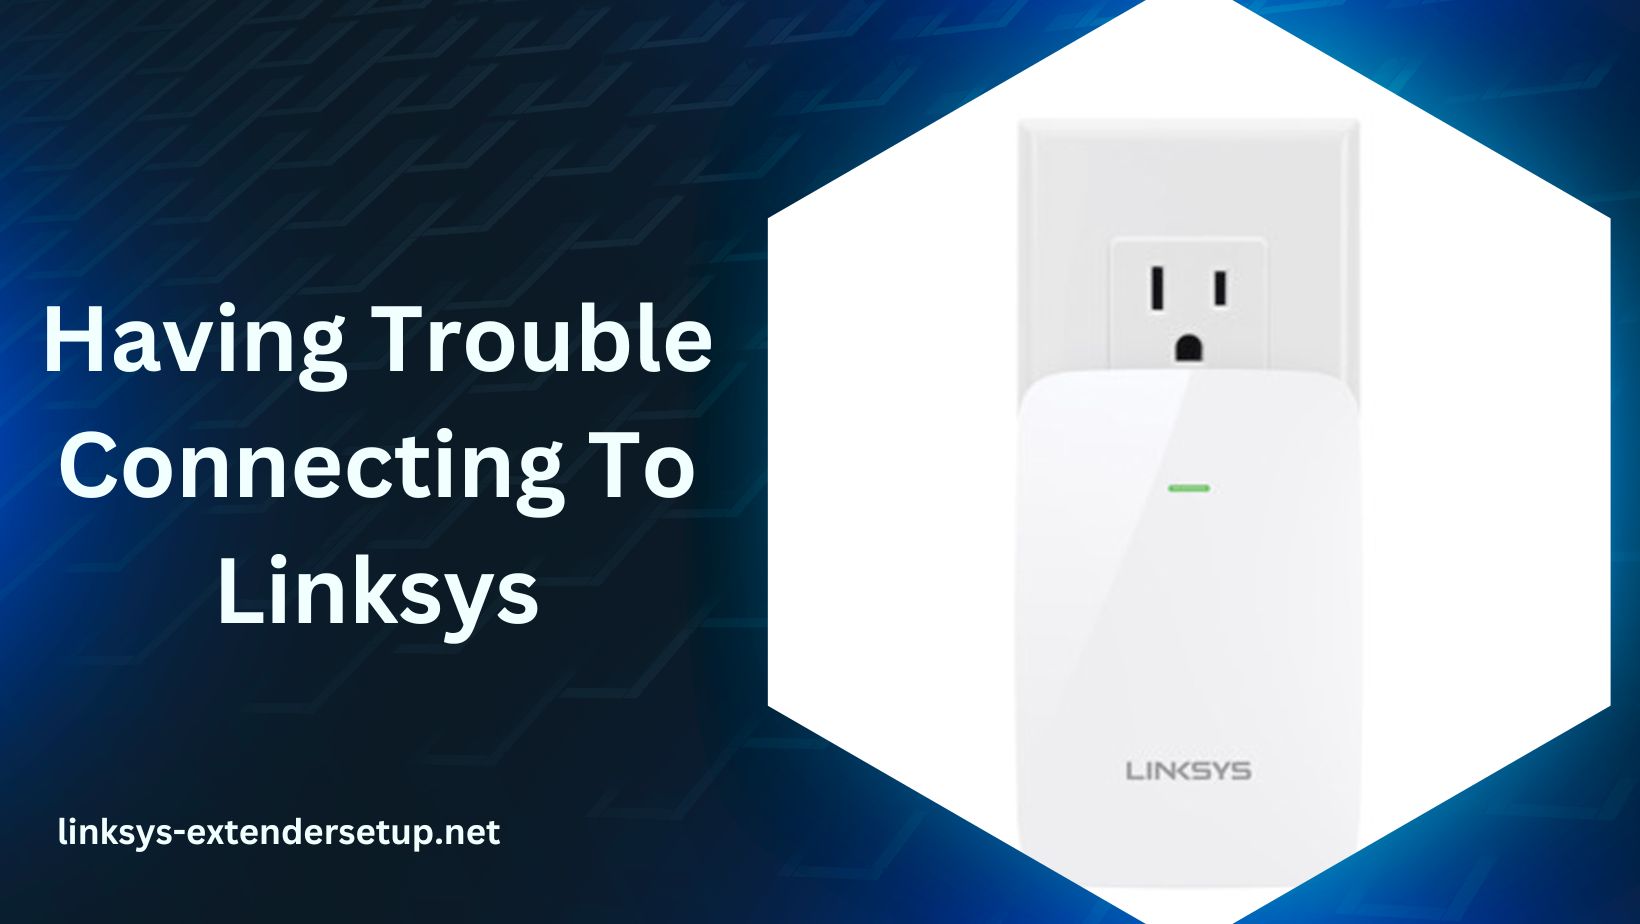 You are currently viewing Having Trouble Connecting To Linksys? Common Problems and Solutions